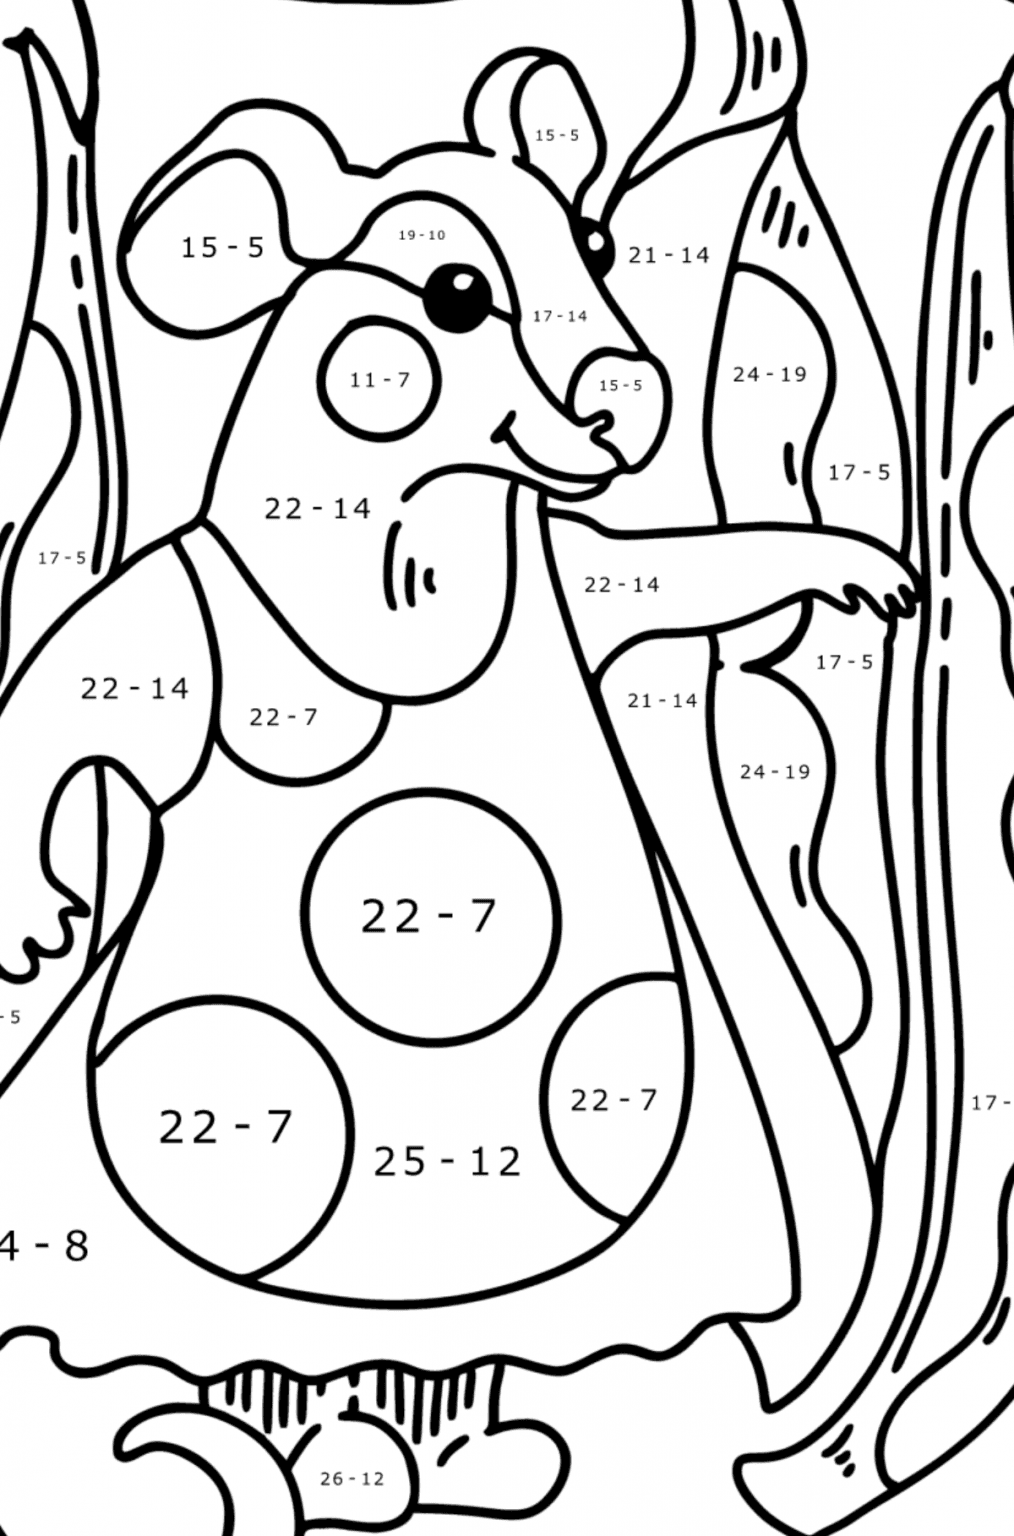 Coloring page - Cute Mouse ♥ Online and Printable for Free!